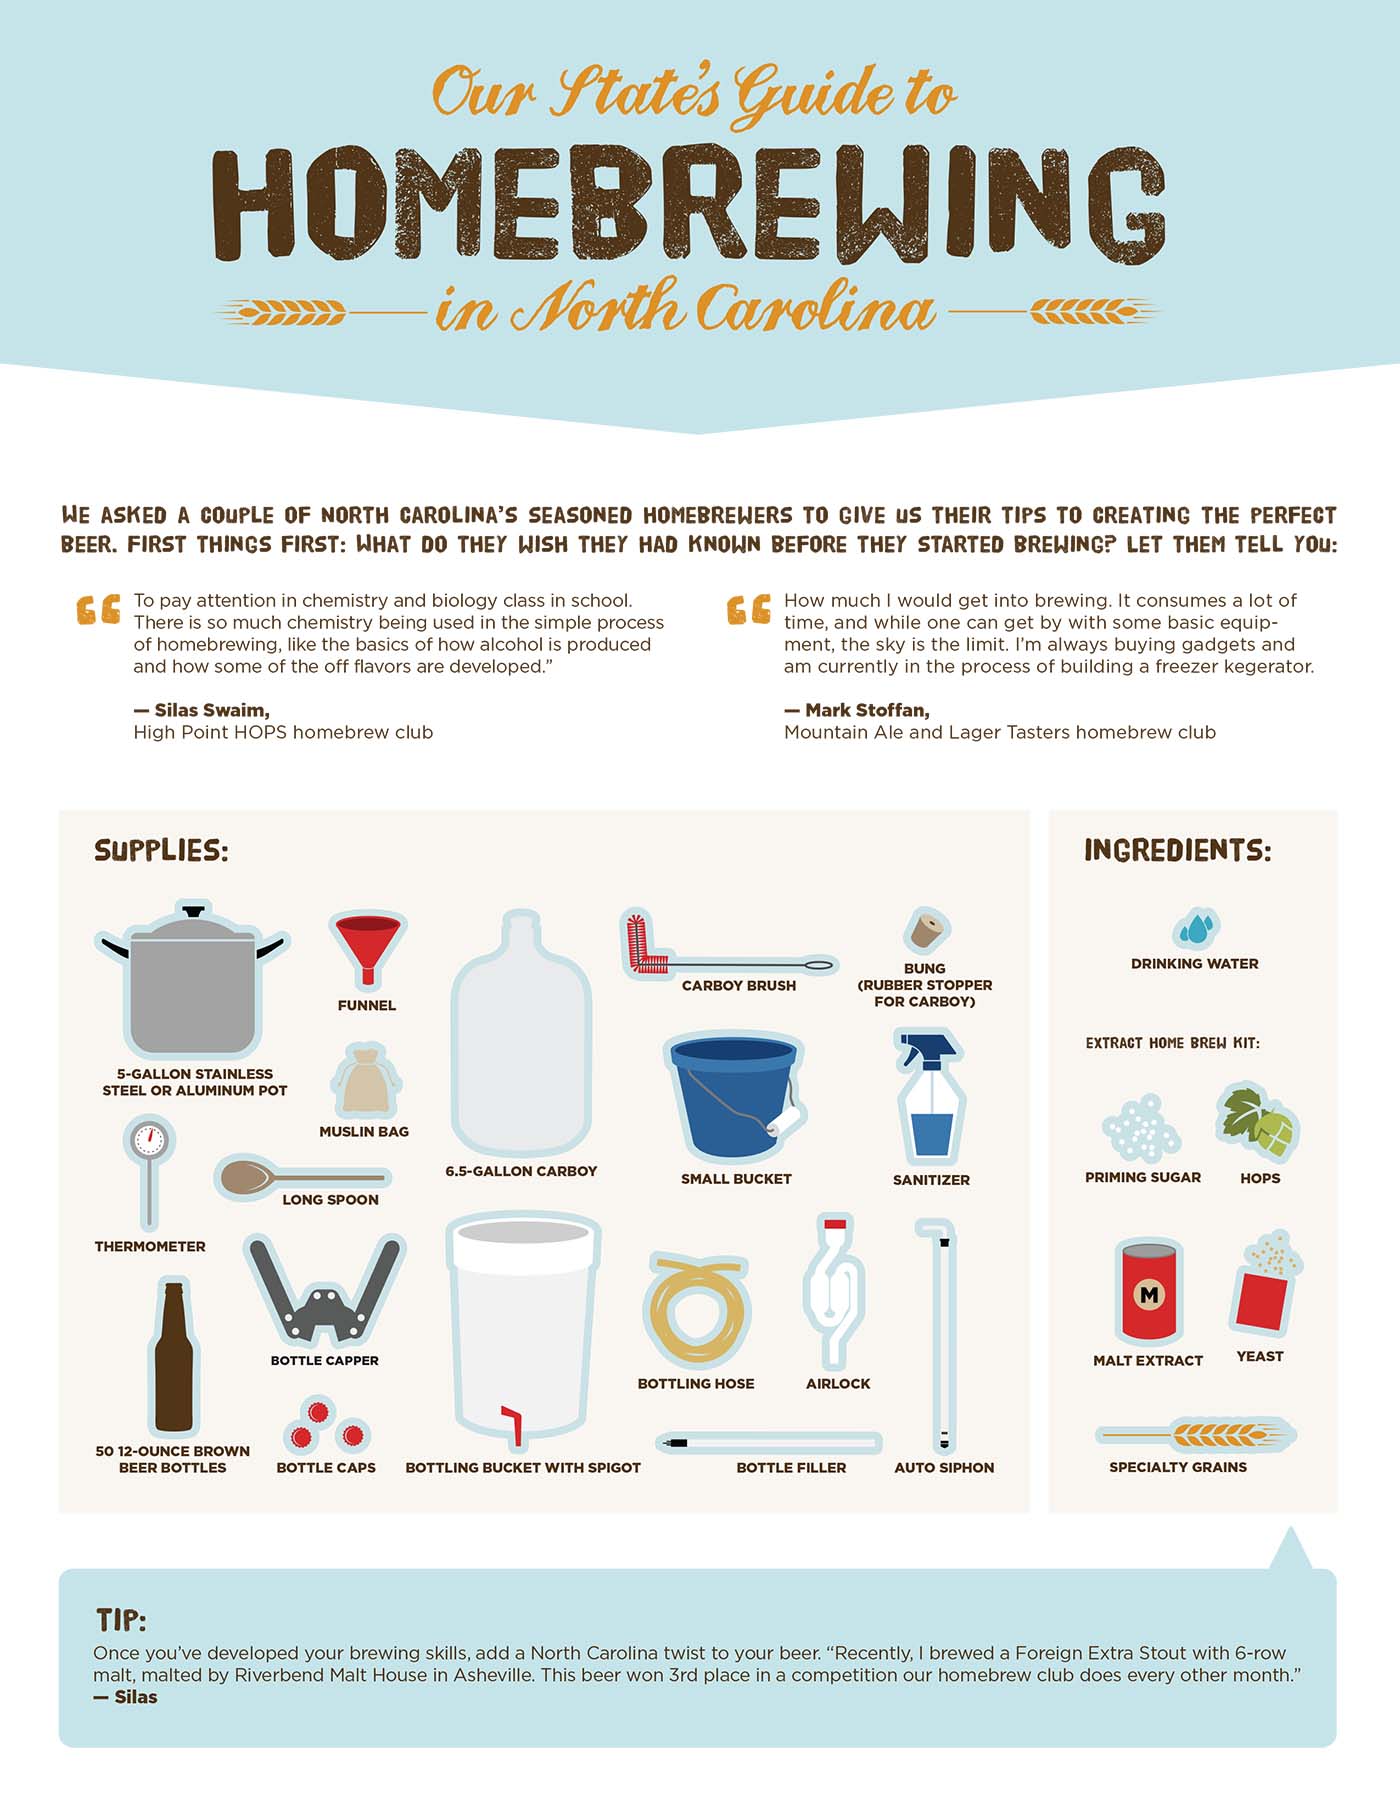 Our State Homebrewing Guide page 1